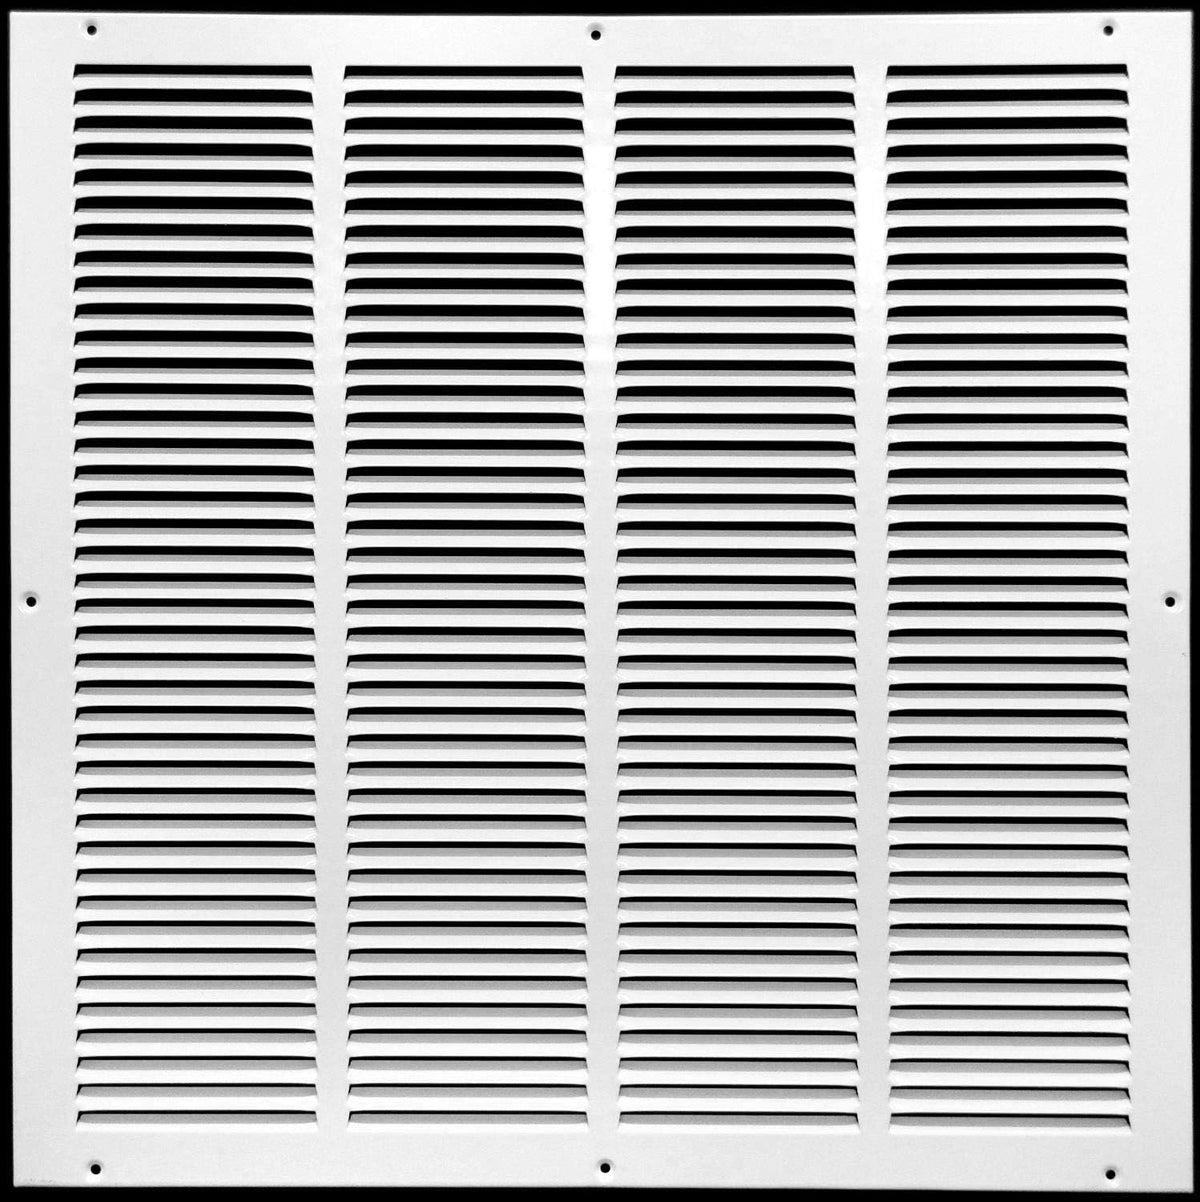 25&quot; X 25&quot; Air Vent Return Grilles - Sidewall and Ceiling - HVAC VENT DUCT COVER DIFFUSER - Steel